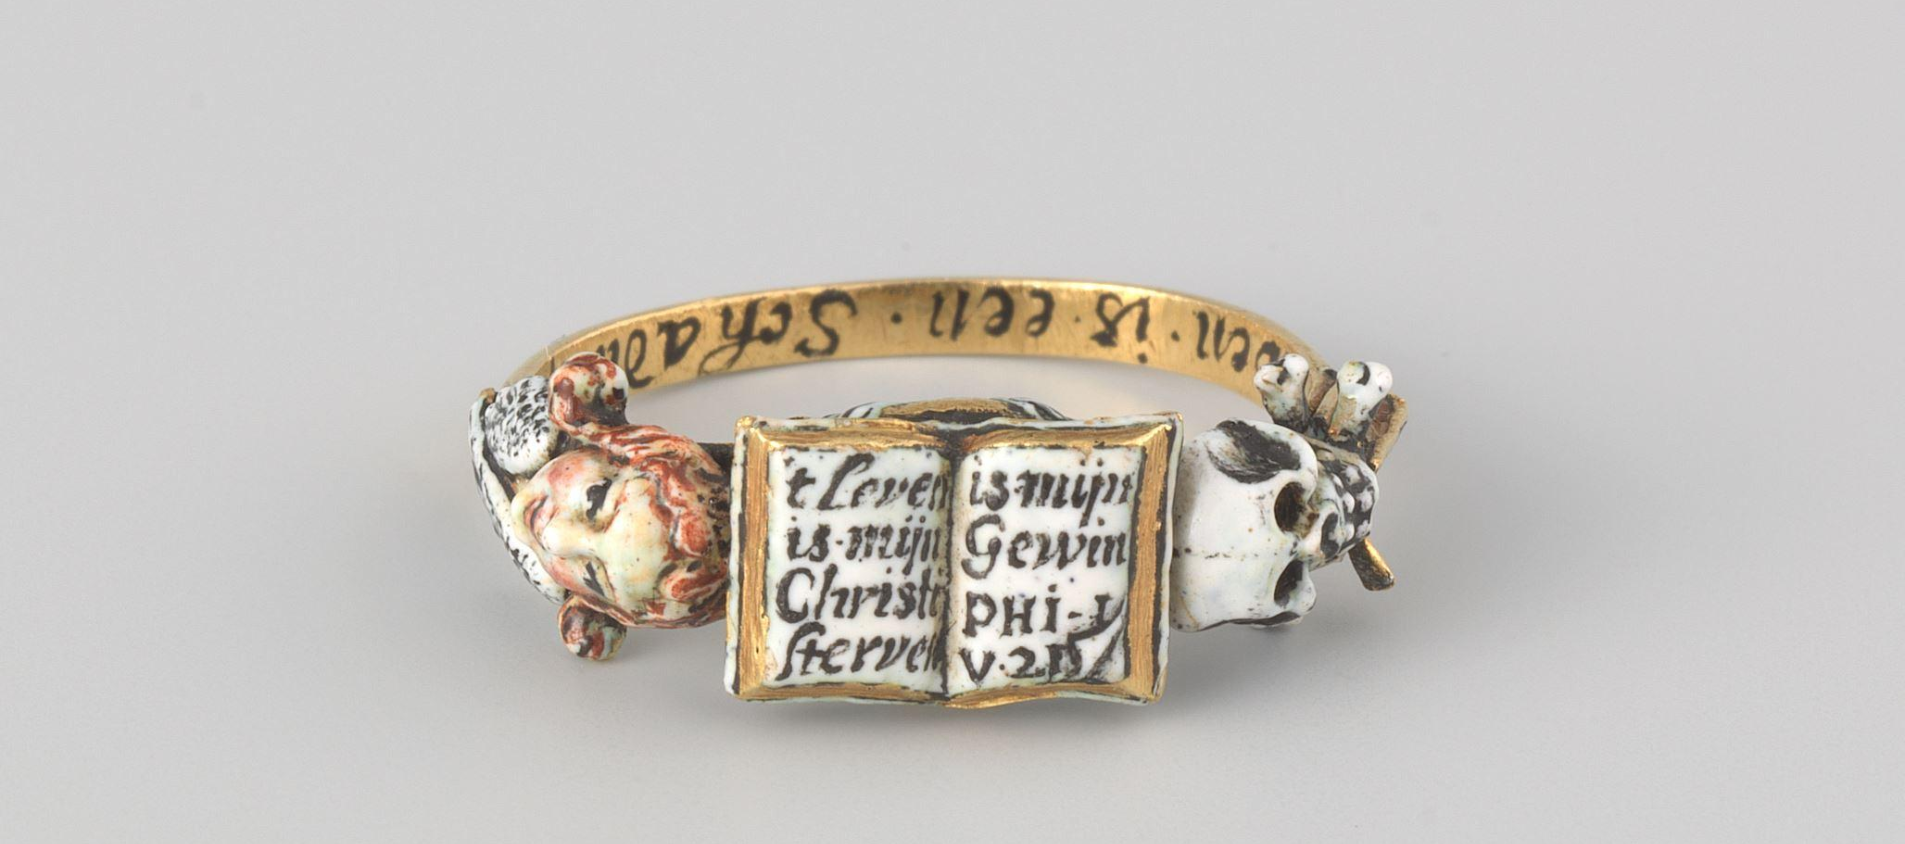 Memento Mori Ring, Anonymous, ca. 1640 - 1660 This gold ring is decorated with memento mori motifs. The Bible text in the open book ’t Leven is mijn Christi, Sterven is mijn Gewin’, (For me, to live is Christ and to die is gain.) The skull with hourglass and the angel reminded the wearer of the ring of the transience of earthly life. On the inside is an inscription: 'our life is a shadow on earth'.